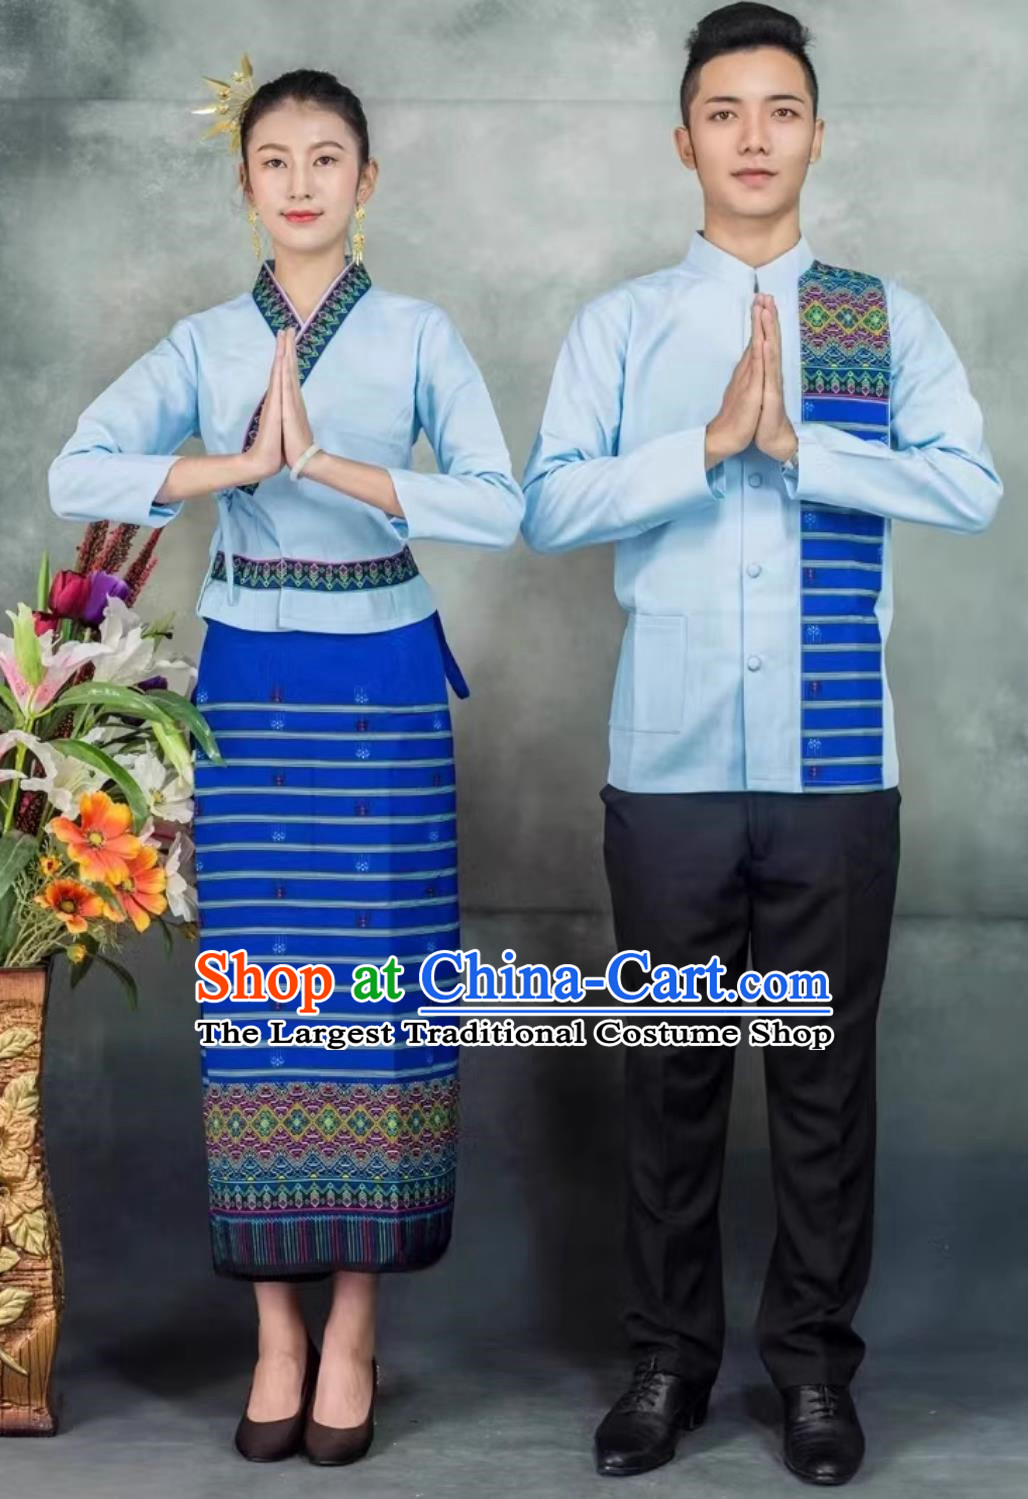 Dai Clothing For Men And Women Blue Suit Restaurant Work Clothes Welcome Staff Uniforms